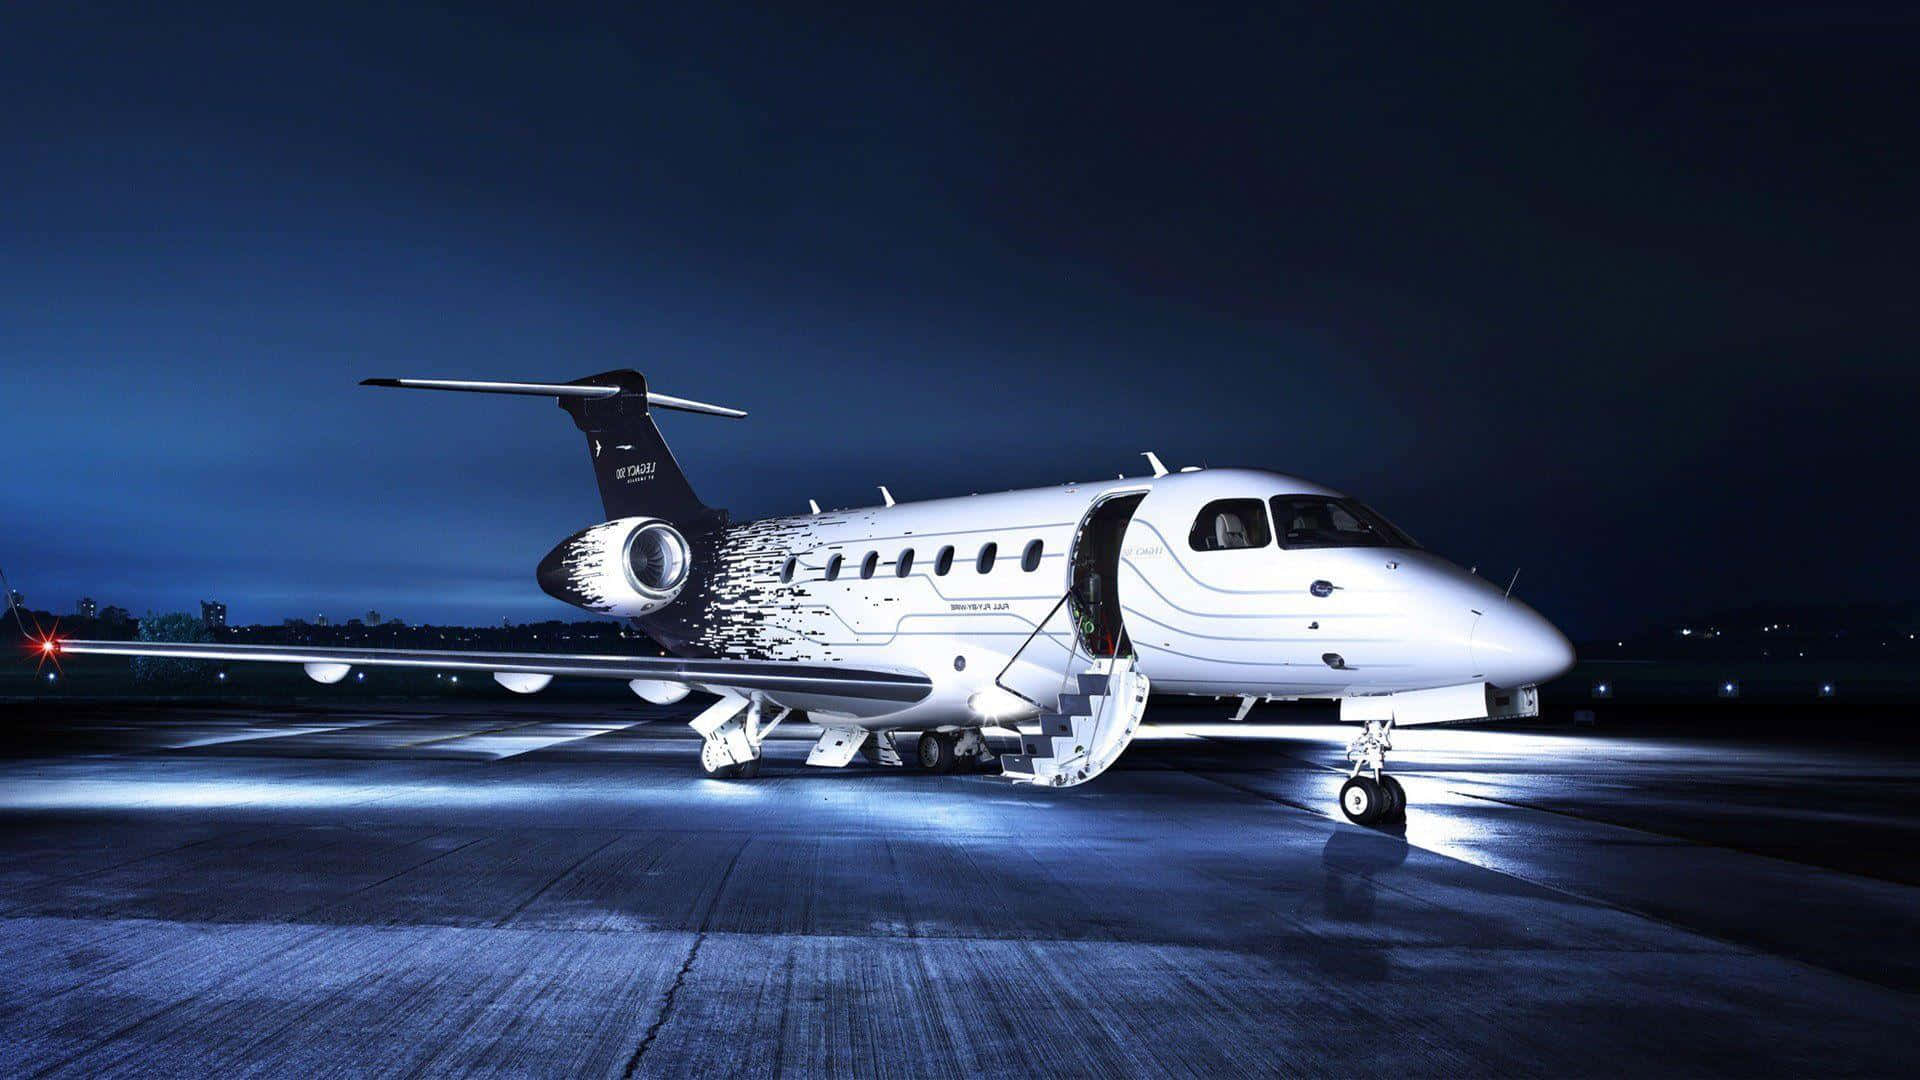 Private Jet On Runway Wallpaper